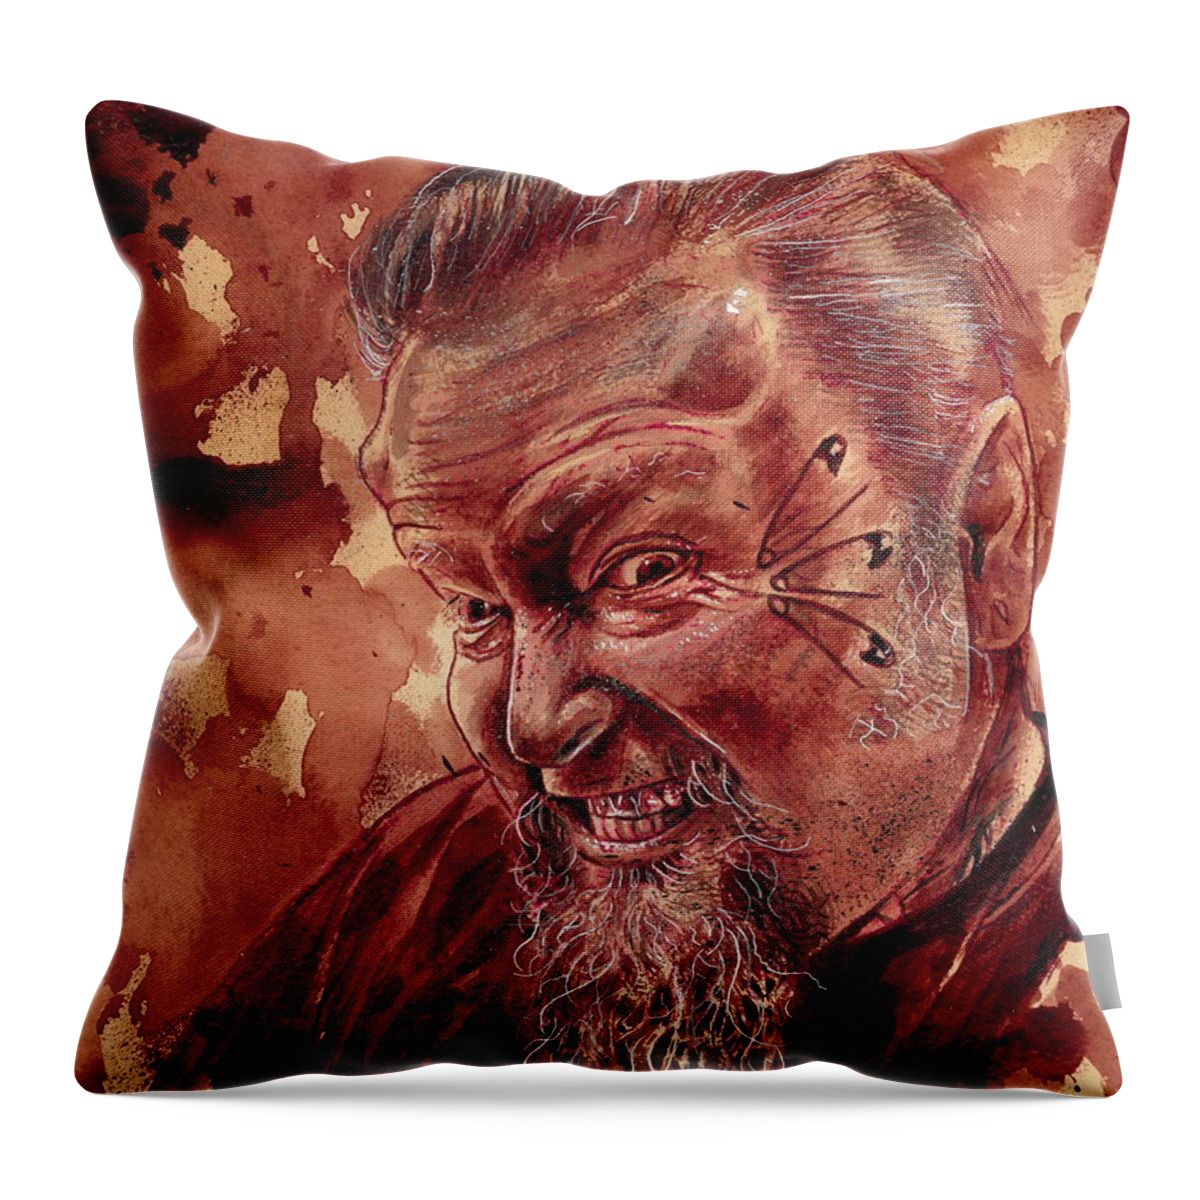 Ryan Almighty Throw Pillow featuring the painting Human Blood Artist Self Portrait - dry blood by Ryan Almighty